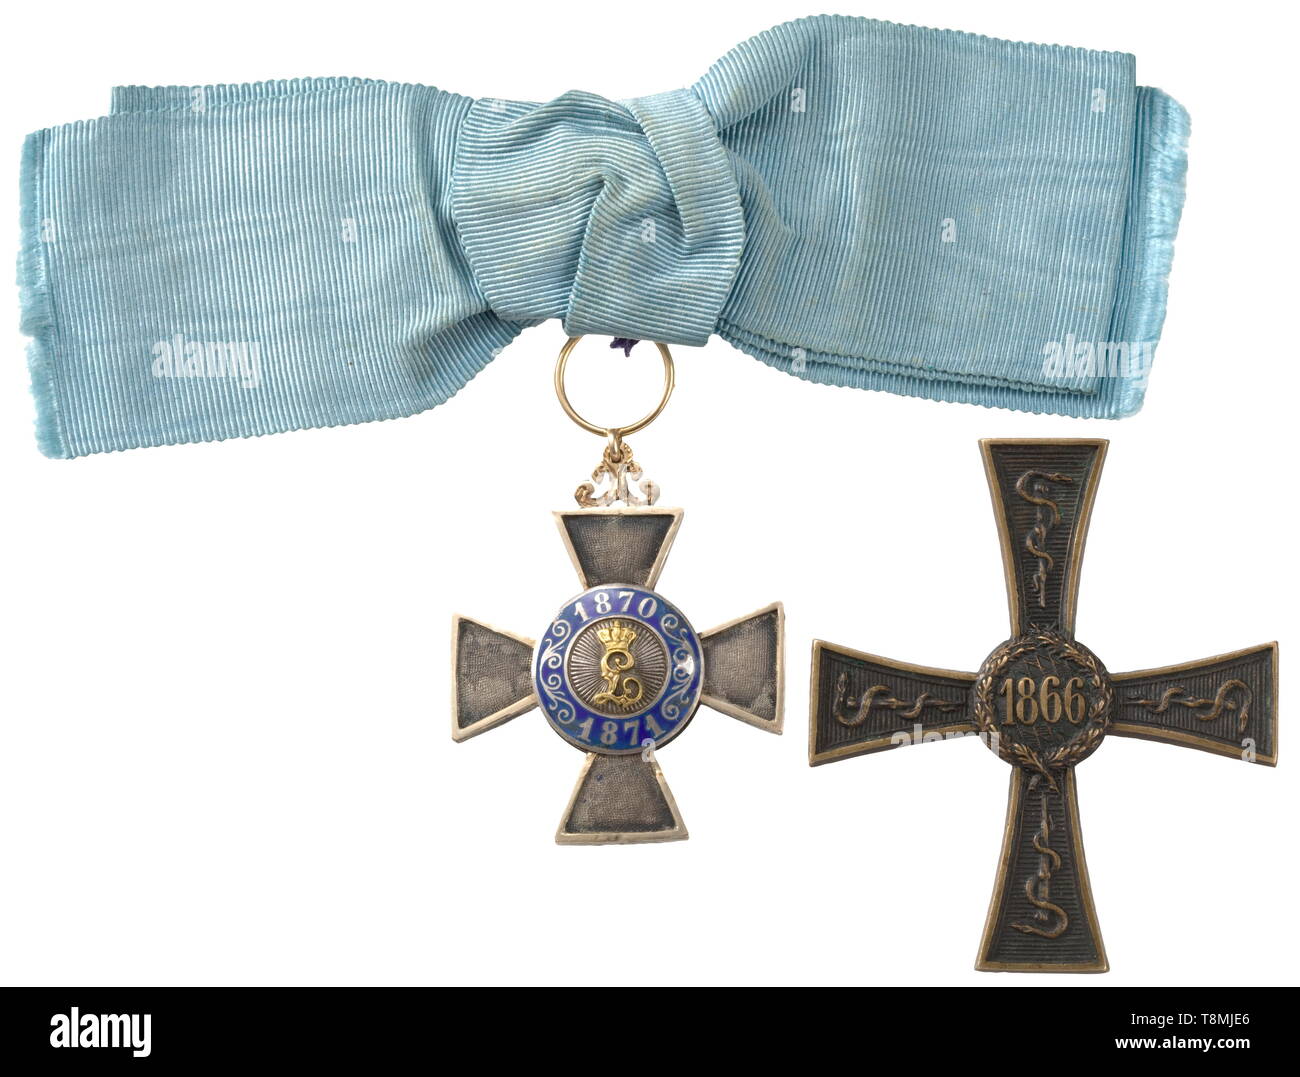 A Commemorative Badge for Meritorious Achievements in the war year 1866 Oxidised bronze cross of the original type produced by the bronzeware manufactory of Christian Hörner in Munich. On a thin attachment pin. Width 46.5 mm. Weight 19 g. The so-called 'Doctor's Cross' was awarded to civilian physicians who hurried to provide assistance during the 1866 war. A total of 359 awards were made. Included is a Merit Cross for the years 1870/71 in good condition on a lady's bow. historic, historical, medal, decoration, medals, decorations, badge of honou, Additional-Rights-Clearance-Info-Not-Available Stock Photo